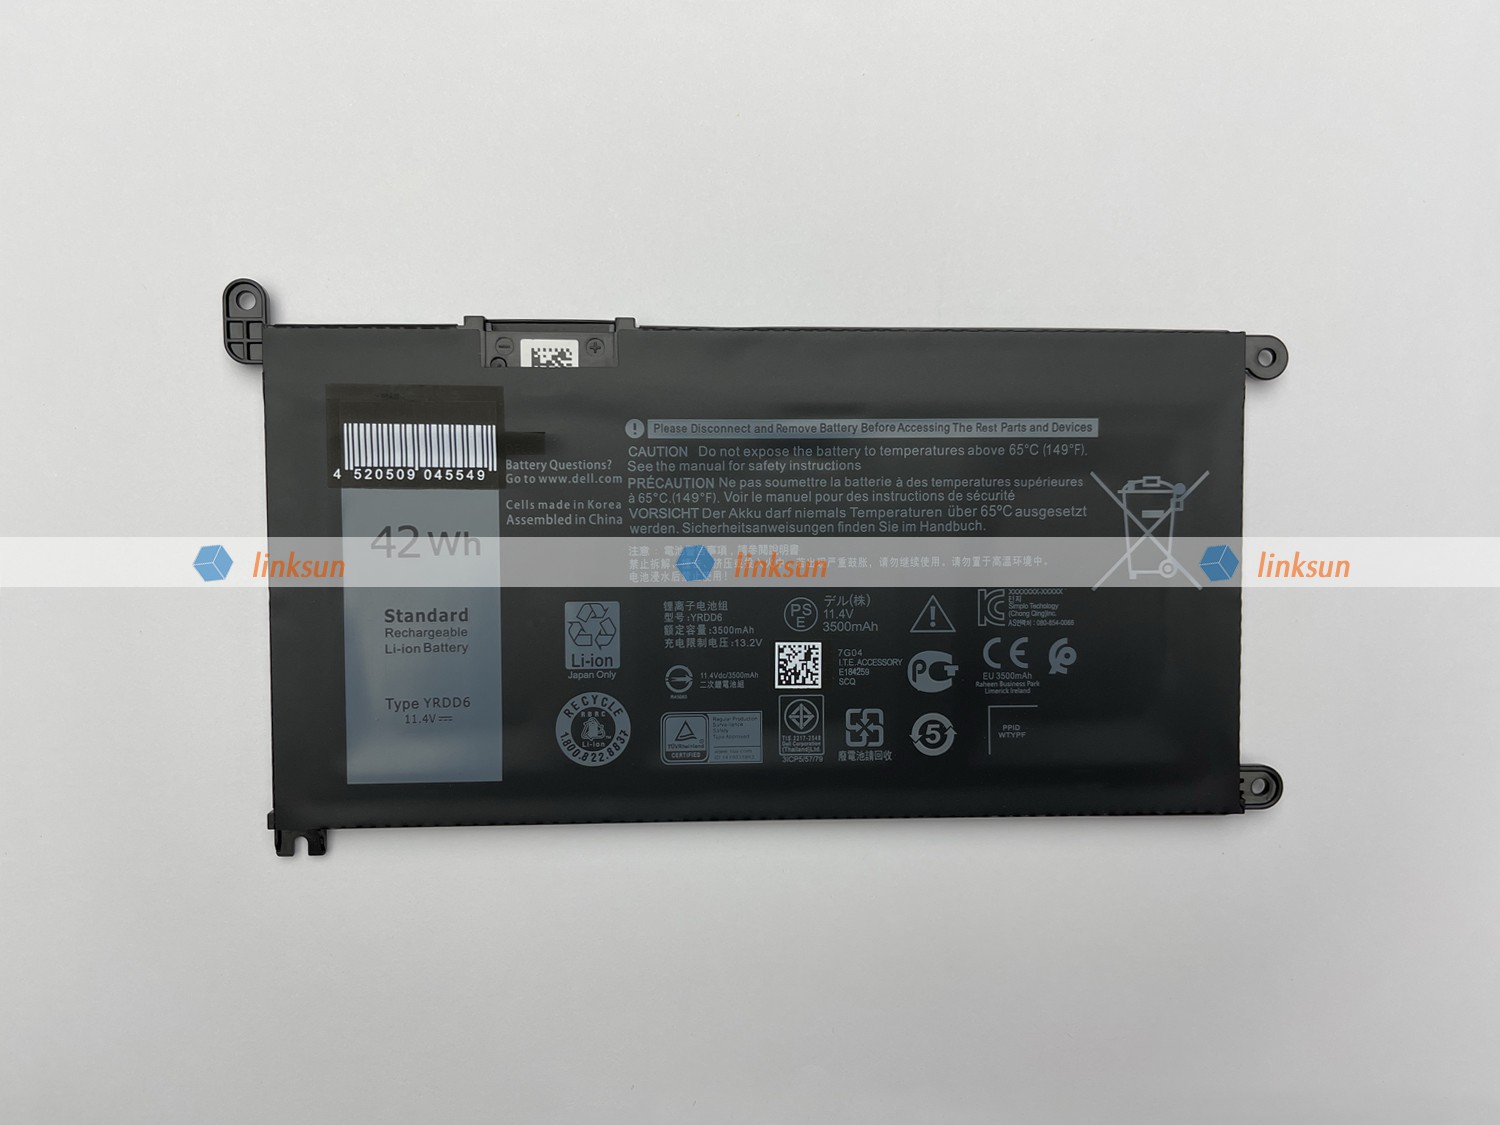 YRDD6 laptop battery front